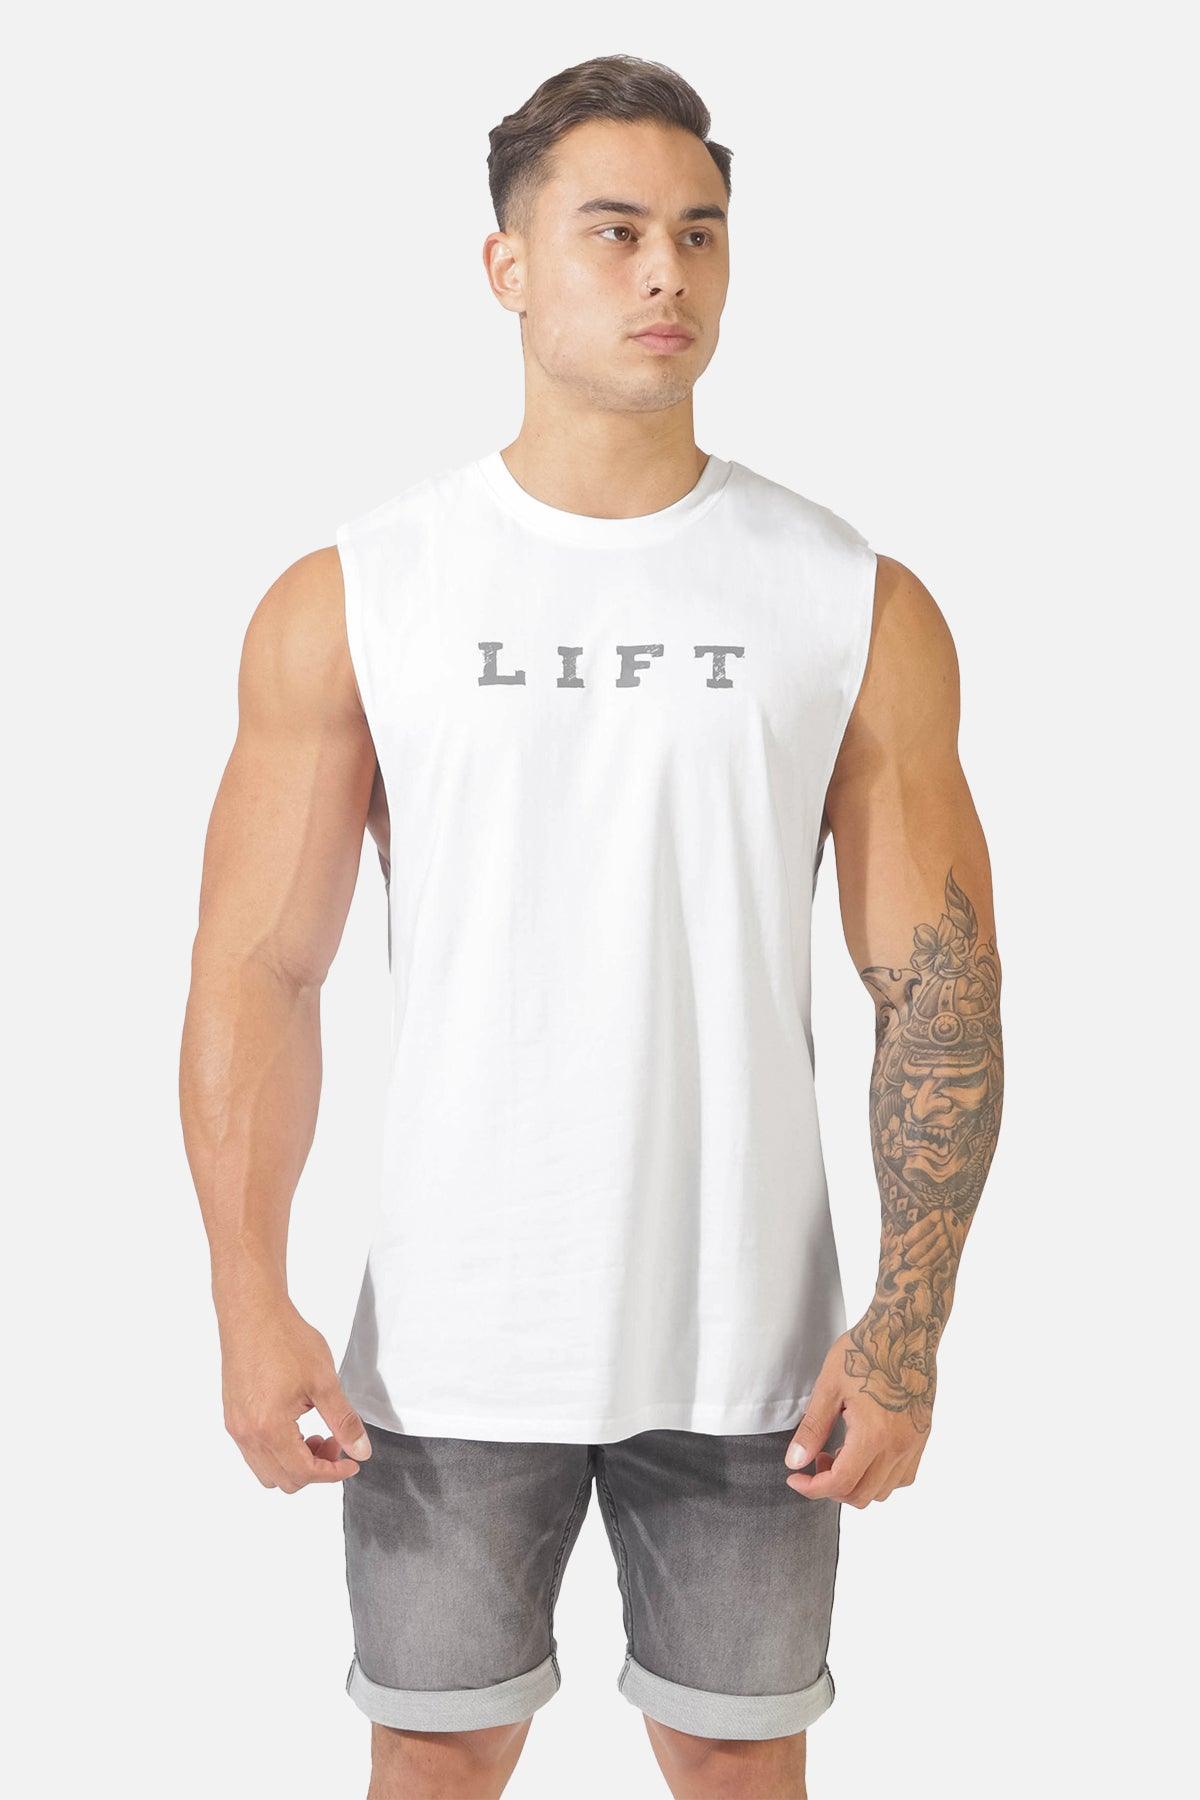 Workout Muscle Tee - Lift – Jed North Canada